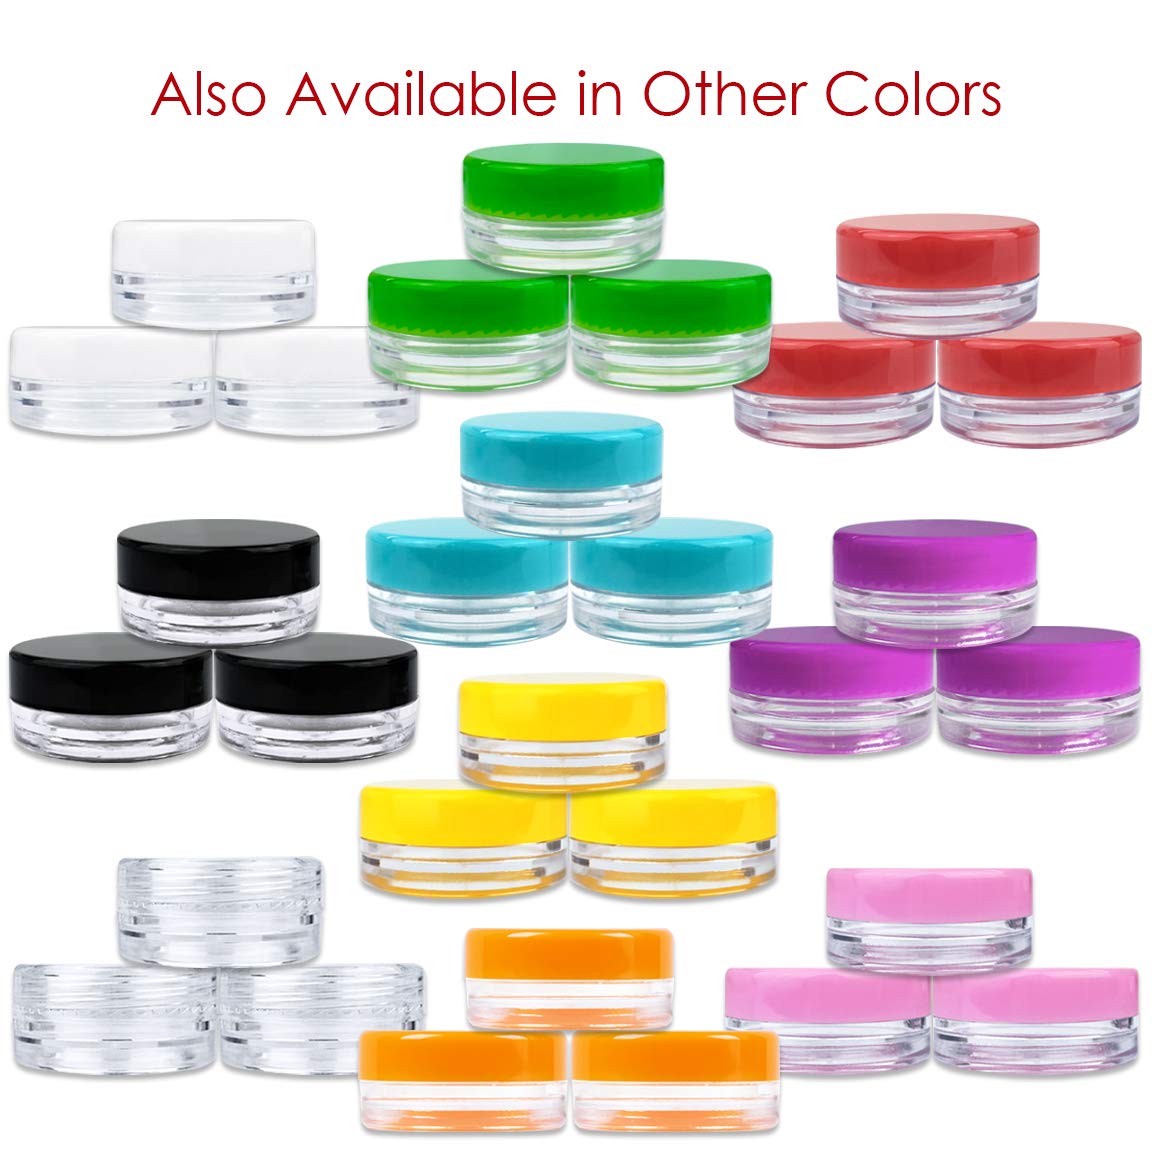 Beauticom 3g/3ml (0.1 Fl Oz) Round Clear Plastic Jars with Round Top Lids for Creams, Lotions, Powders, Glitters, and more. (Color: Clear Lid, Quantity: 50 Pieces)